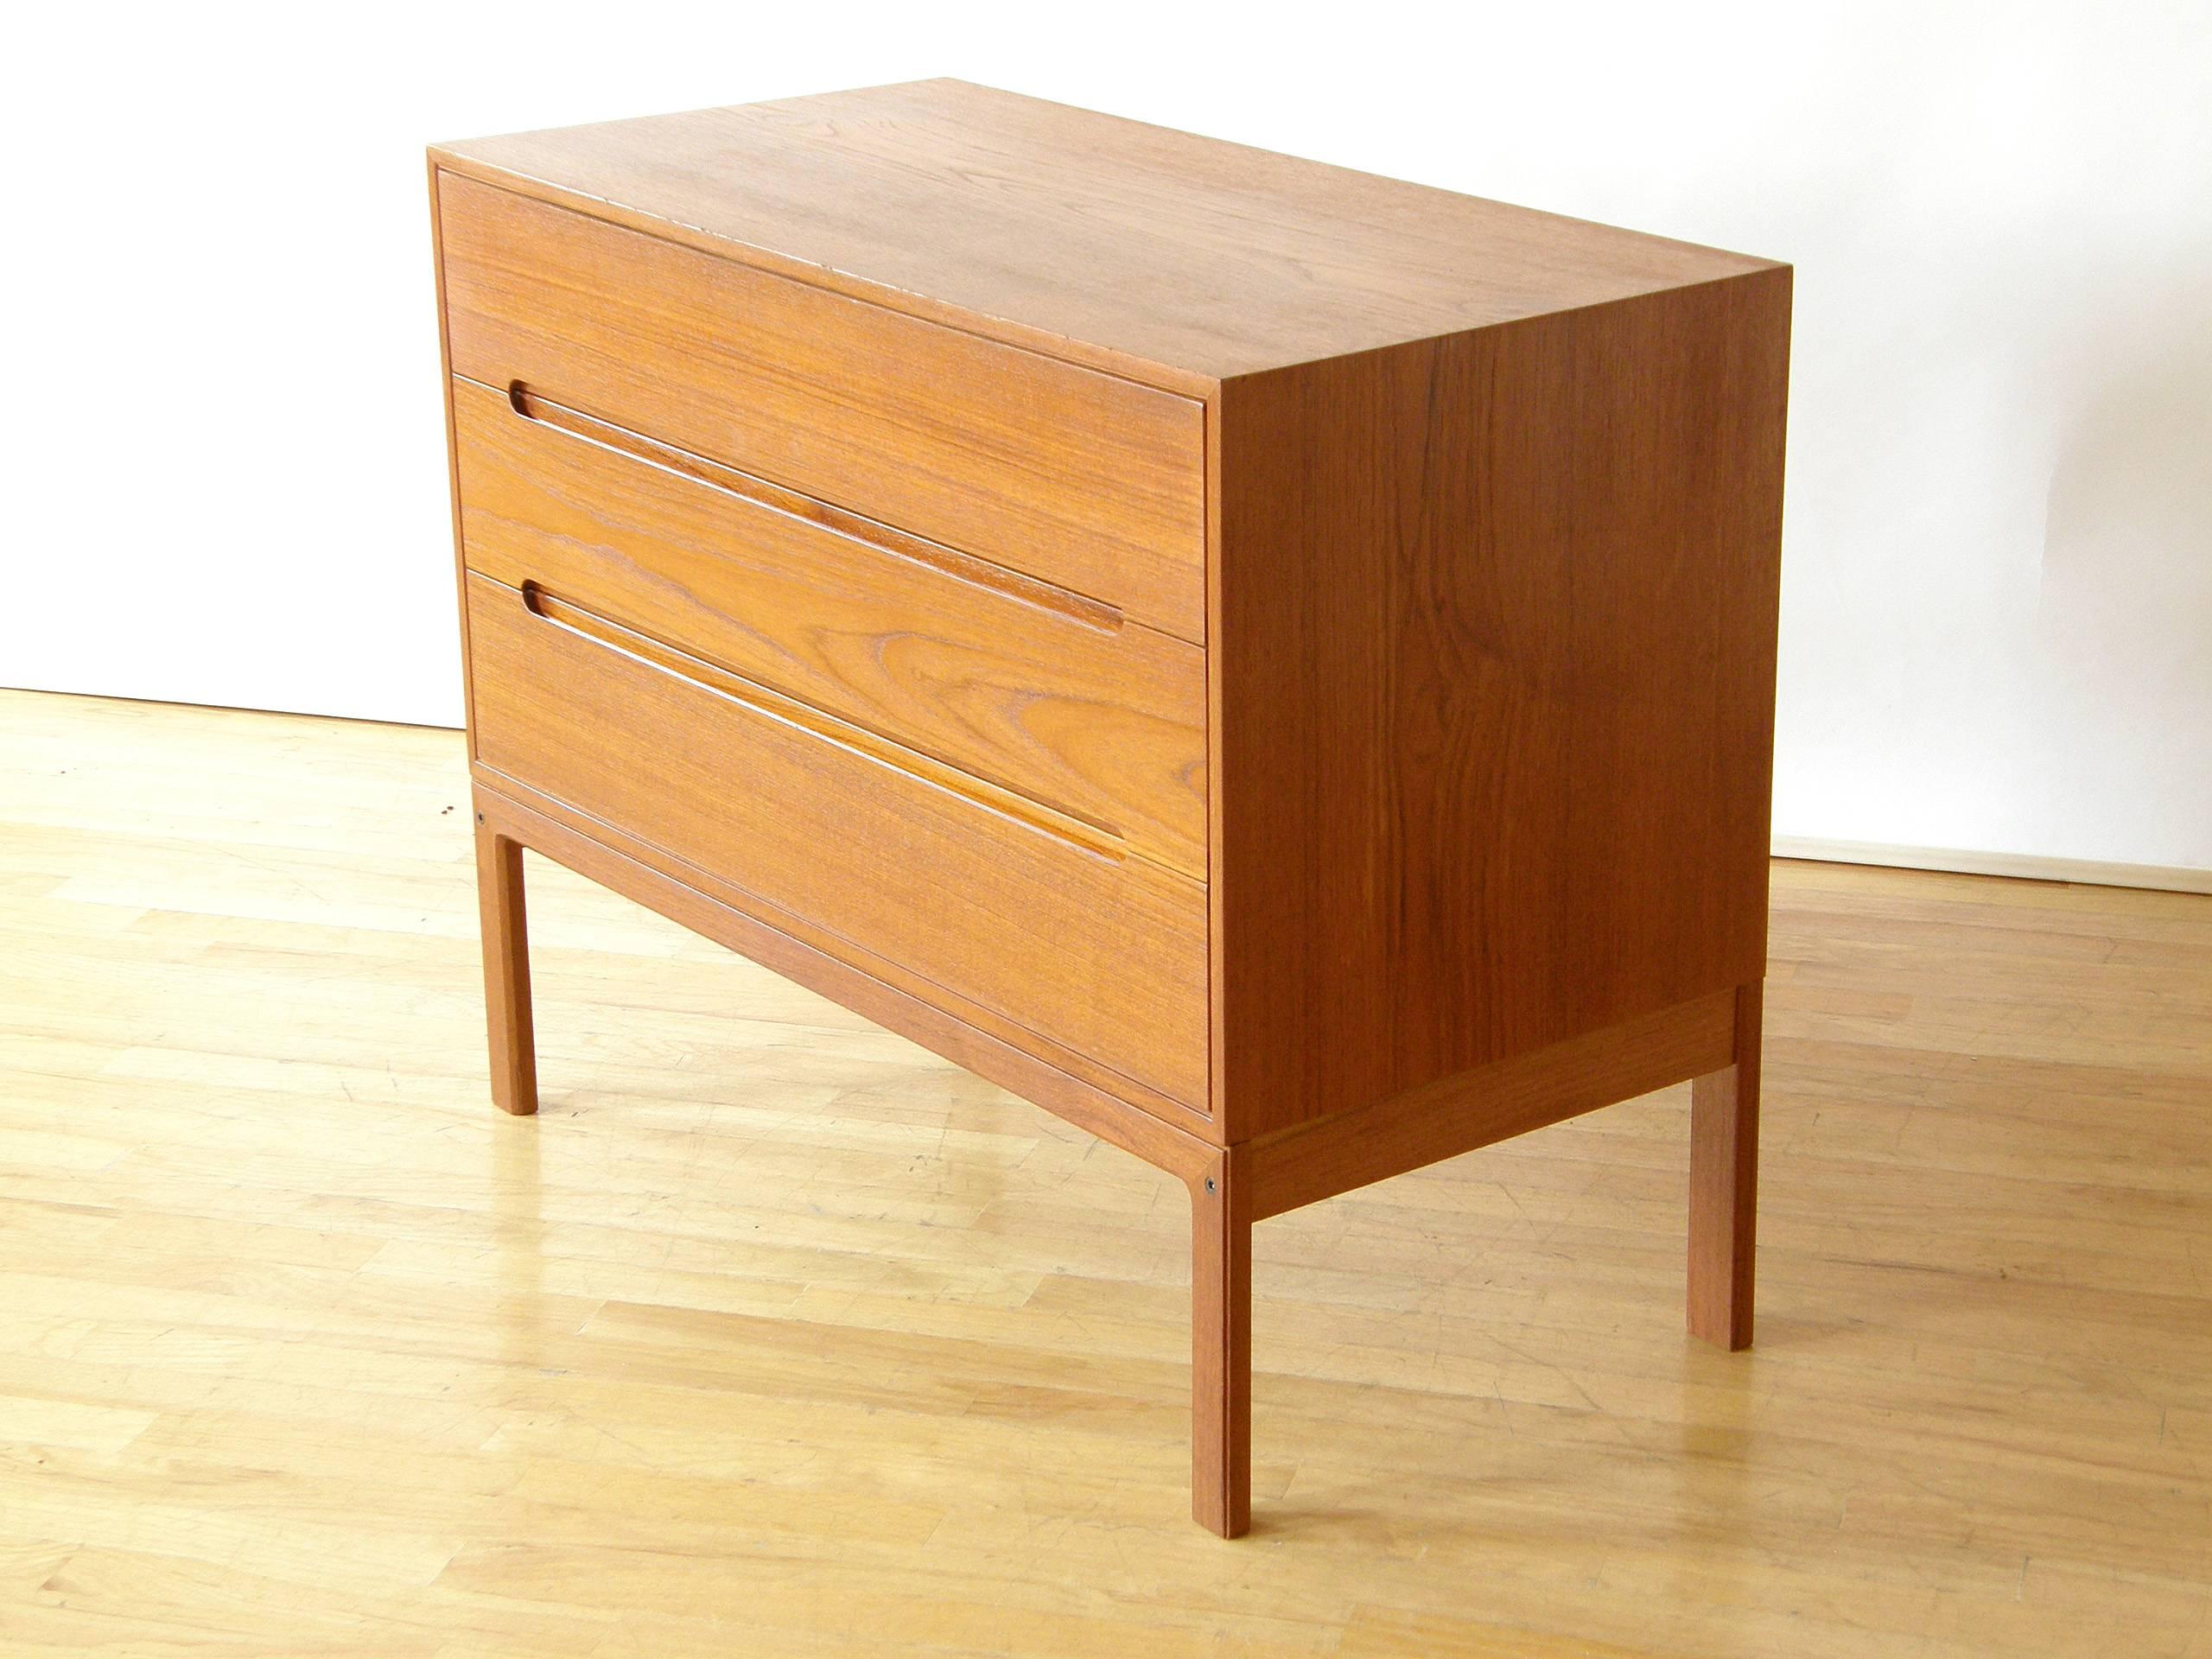 Teak, three-drawer dresser designed by Arne Wahl Iversen for Vinde Mobelfabrik, Denmark.

Please contact us if you have any questions.